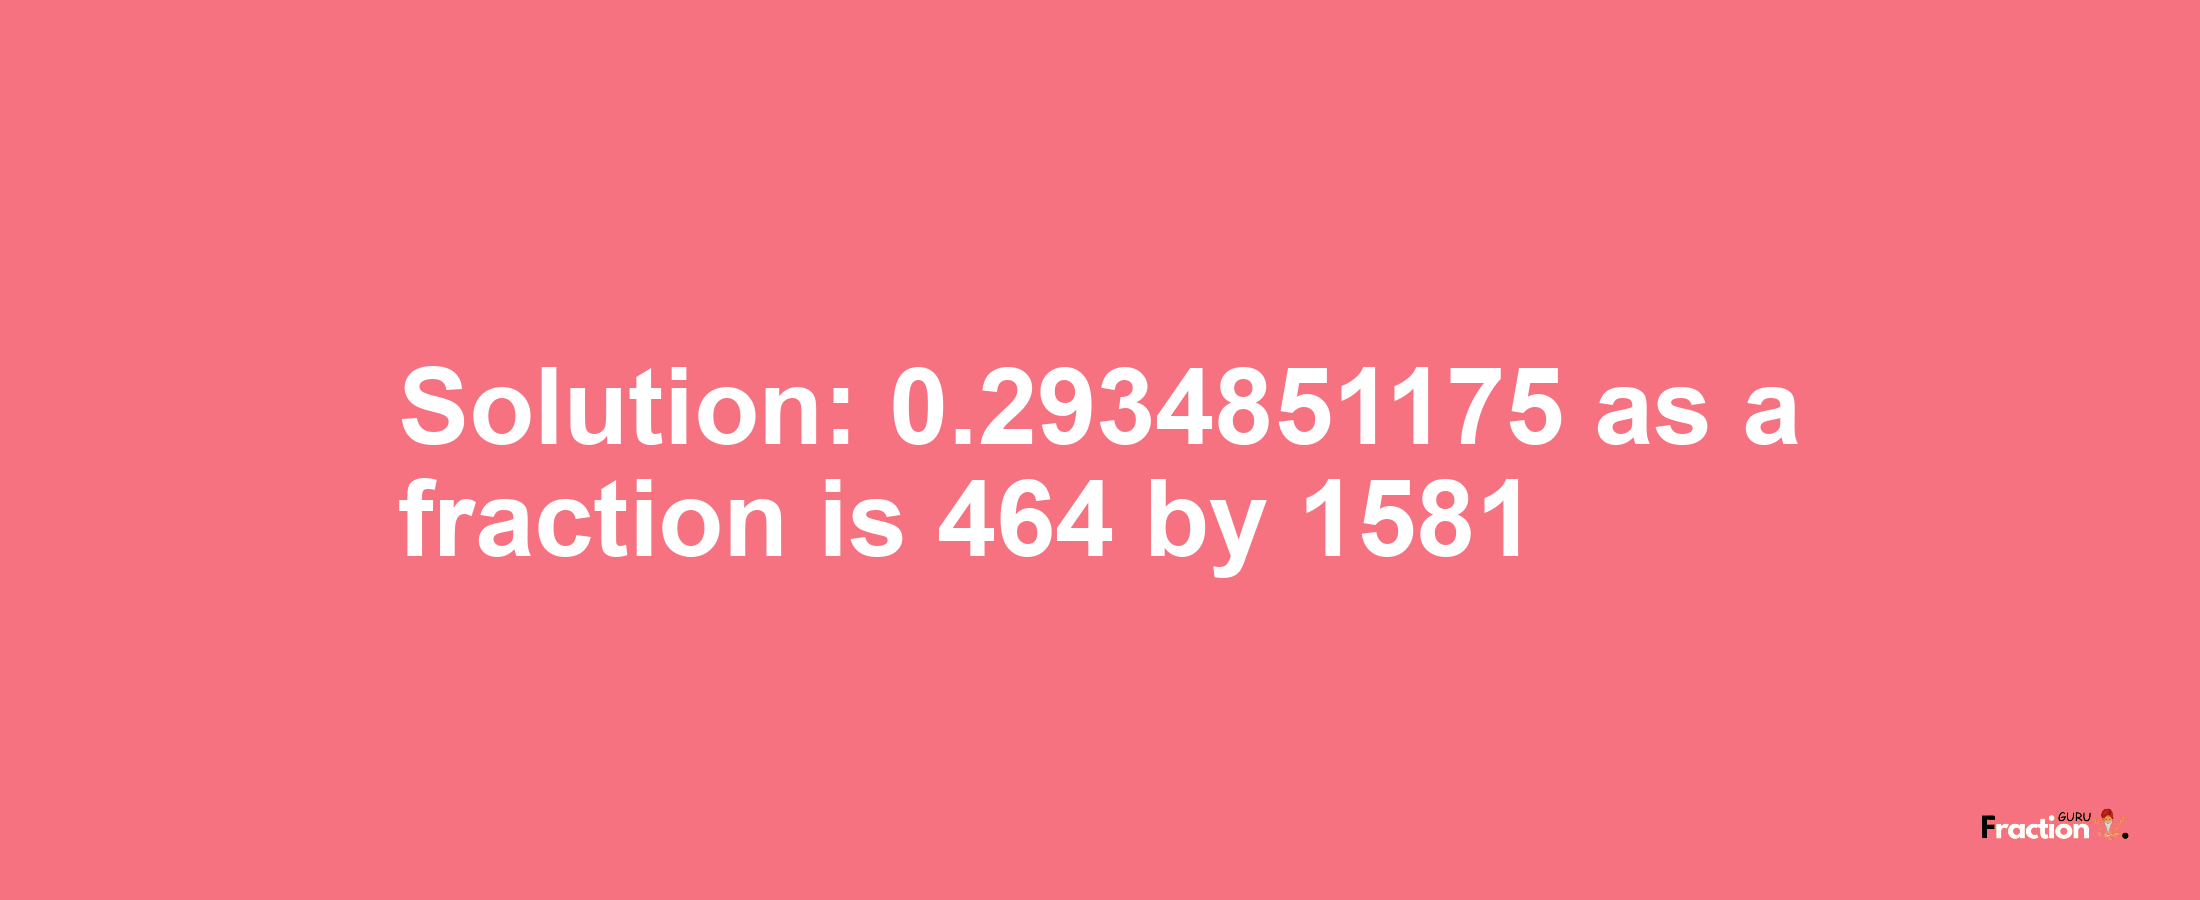 Solution:0.2934851175 as a fraction is 464/1581